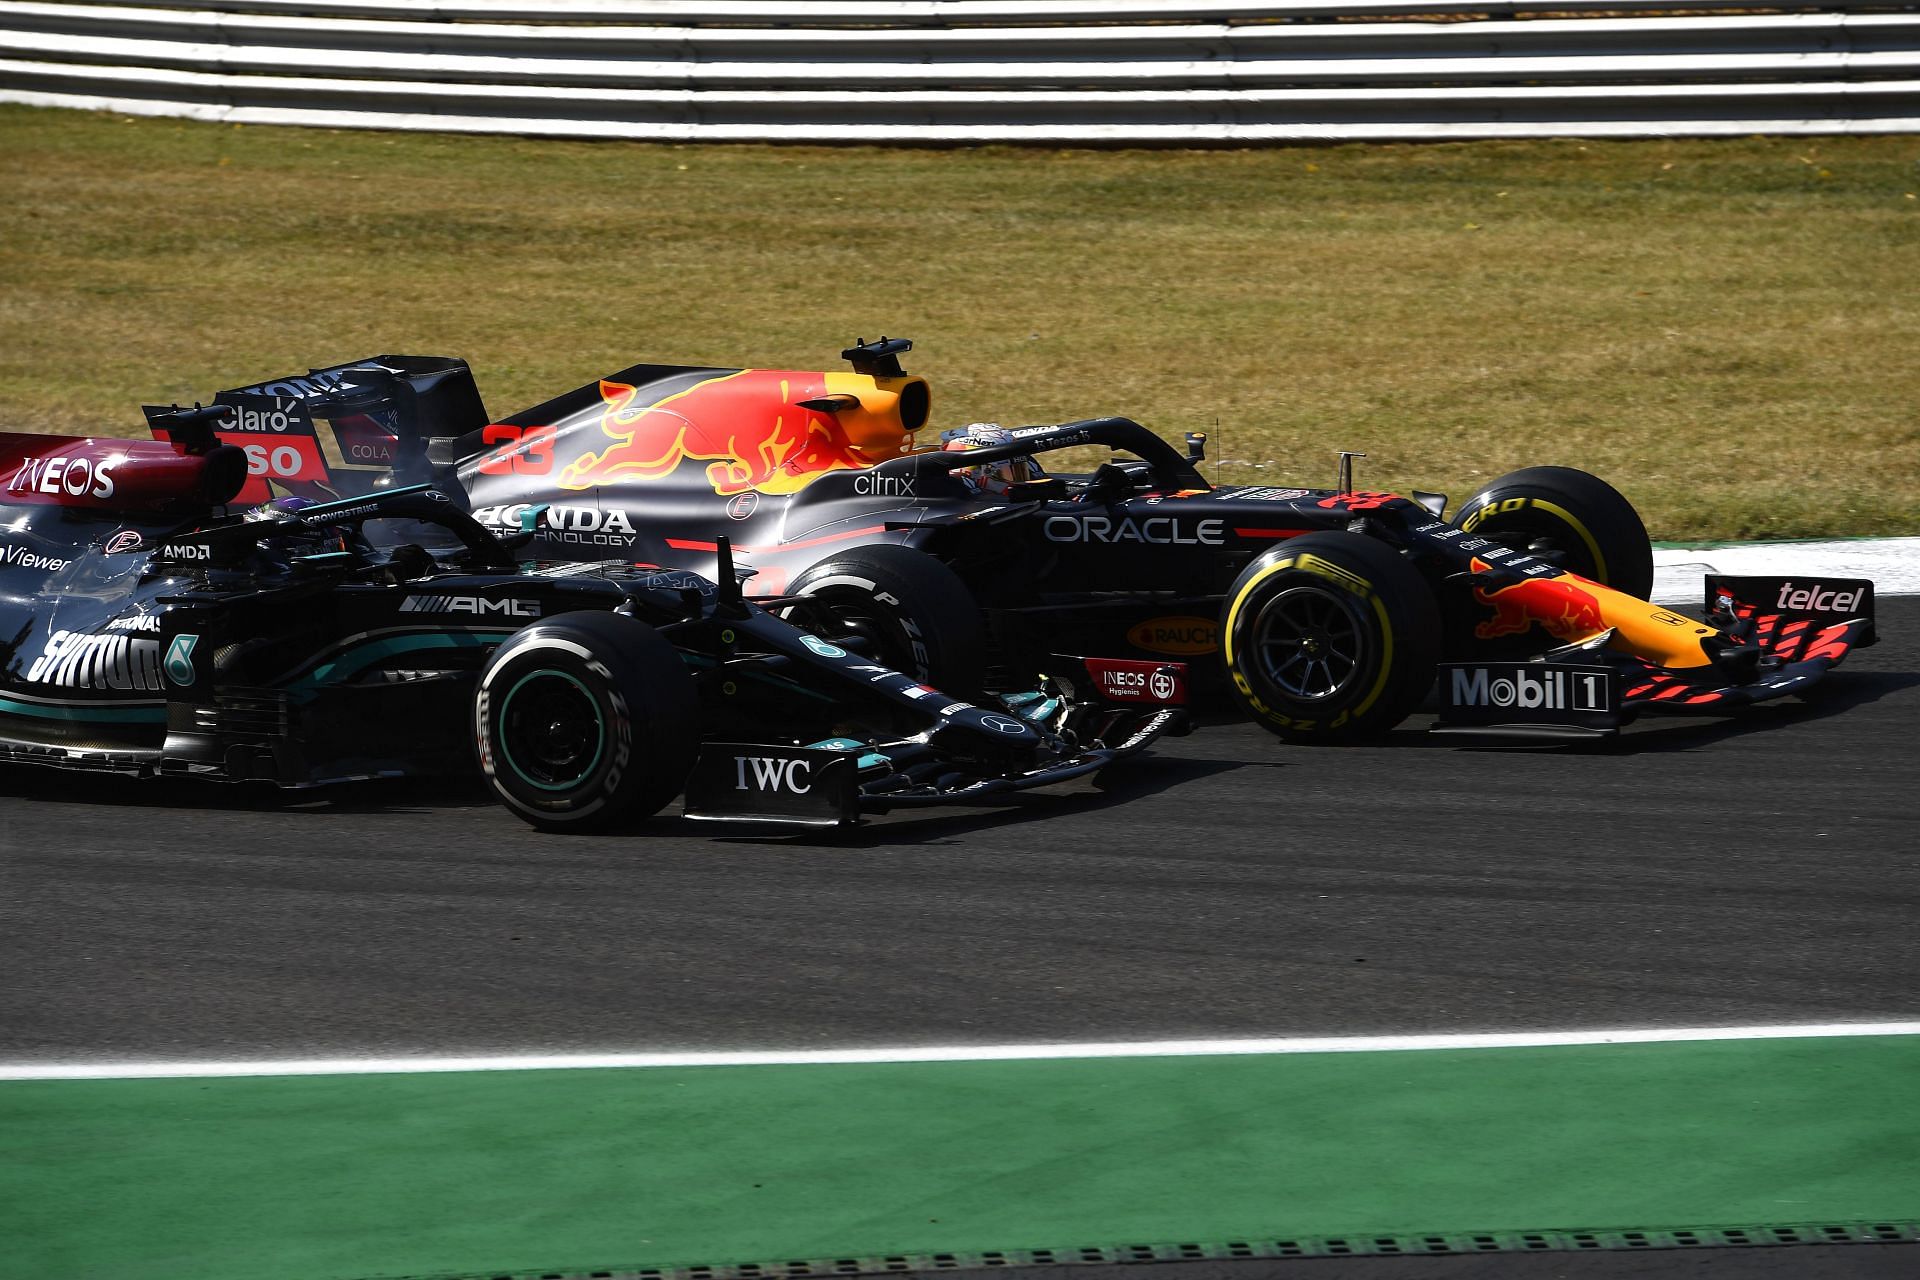 Lewis Hamilton and Max Verstappen will start on front row for the Brazil Grand Prix sprint. (Photo by Rudy Carezzevoli/Getty Images)